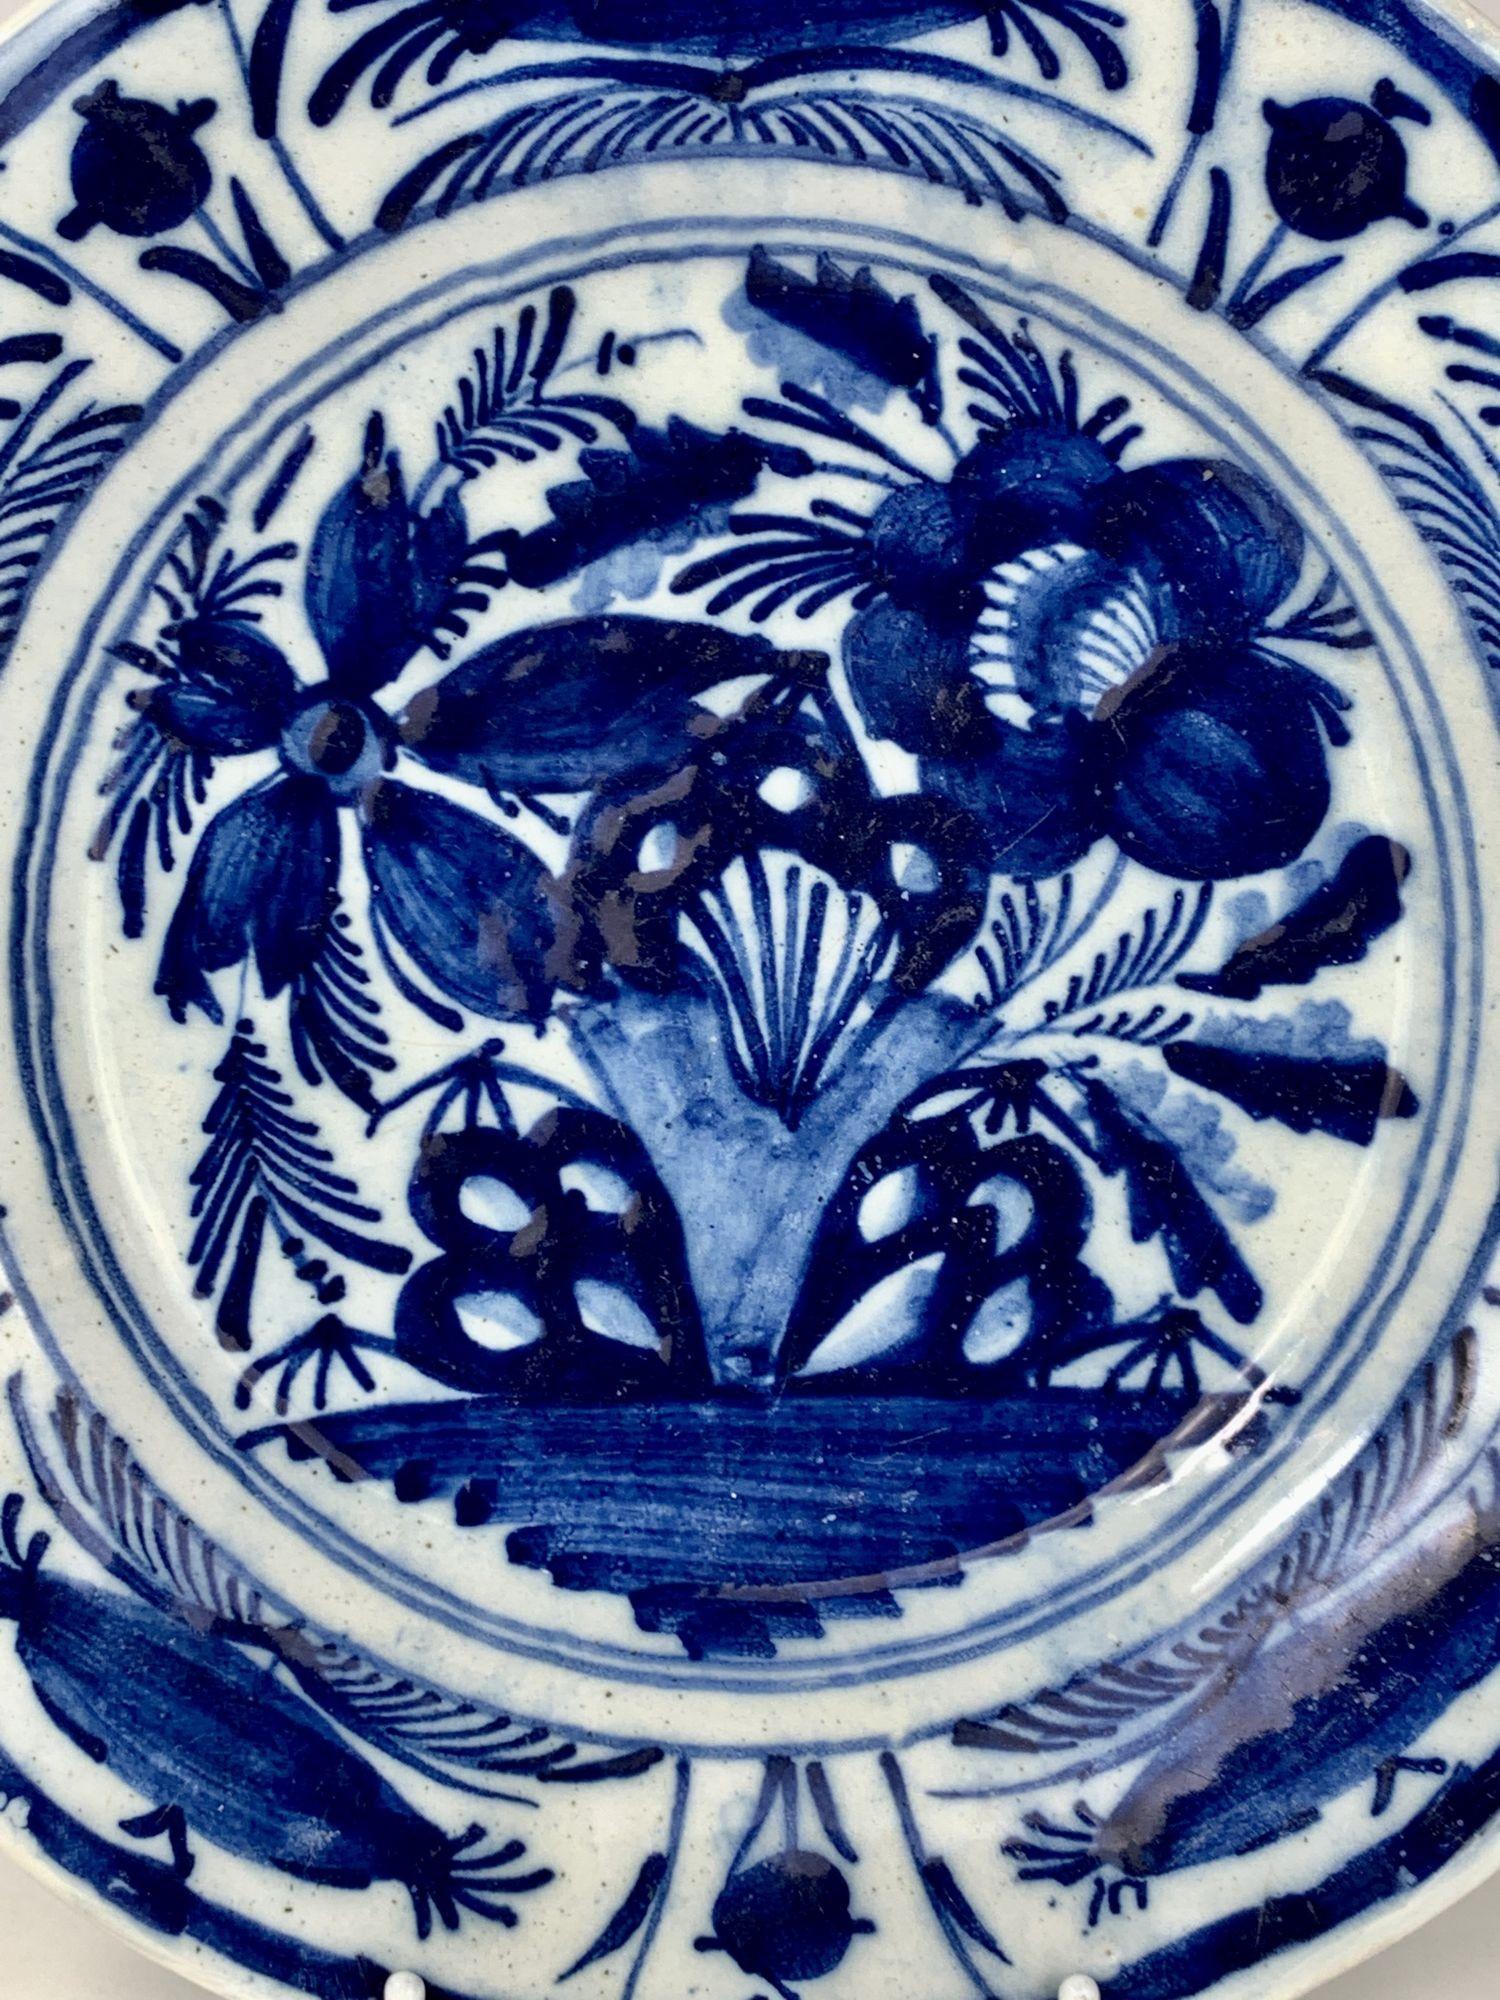 This lovely Delft plate is hand-painted in deep cobalt blue. 
Made in the Netherlands circa 1800, it shows flowers bursting into view. 
The border is decorated with panels depicting buds and flowers.  
This Delft plate is a beautiful example of